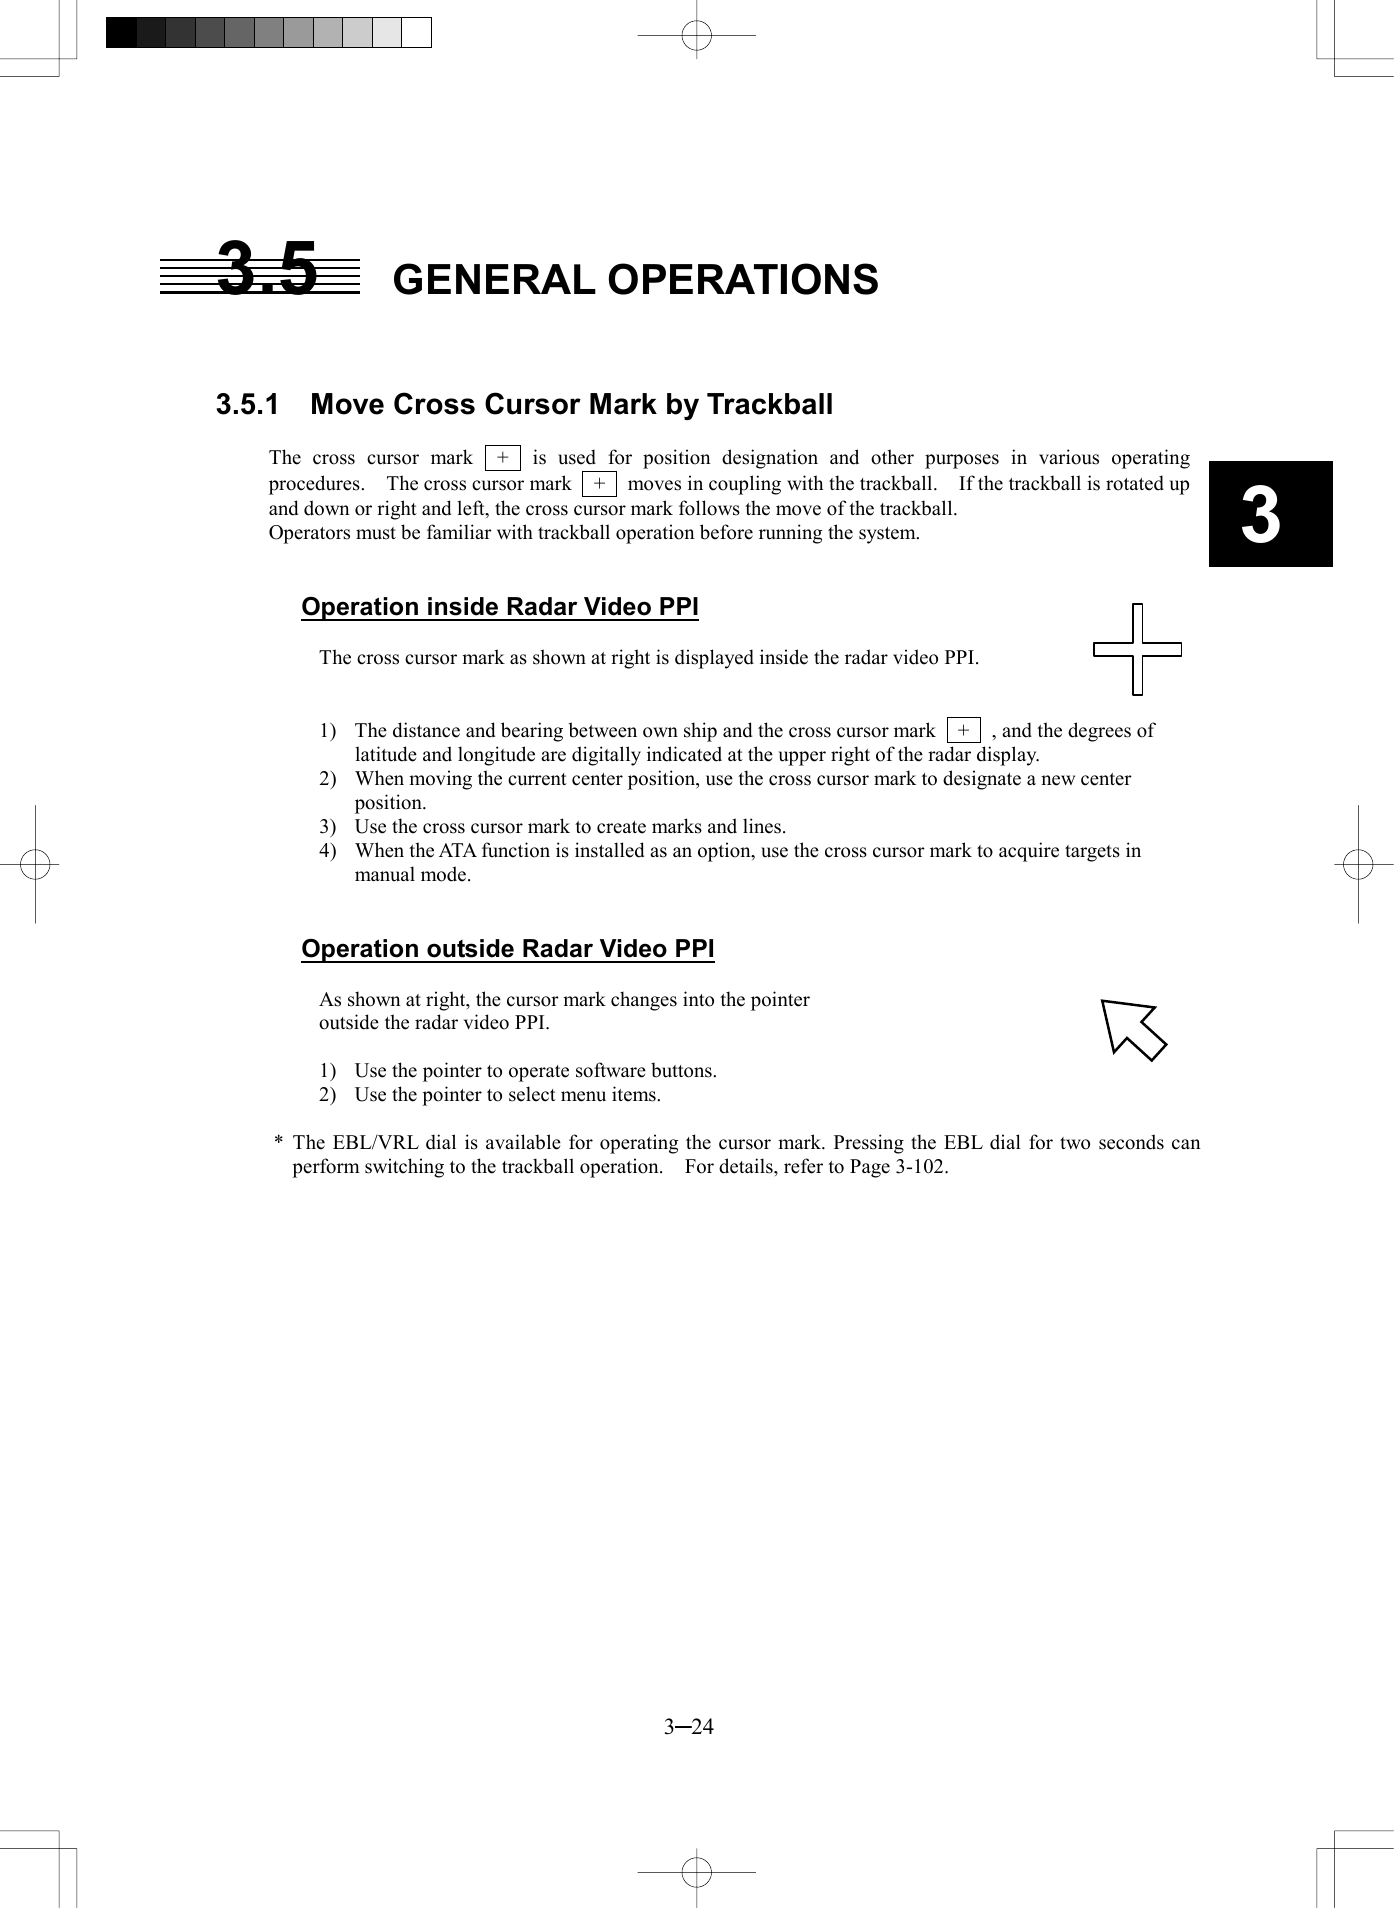   3─24 3 3.5 GENERAL OPERATIONS   3.5.1    Move Cross Cursor Mark by Trackball  The cross cursor mark  +  is used for position designation and other purposes in various operating procedures.    The cross cursor mark    +    moves in coupling with the trackball.    If the trackball is rotated up and down or right and left, the cross cursor mark follows the move of the trackball. Operators must be familiar with trackball operation before running the system.   Operation inside Radar Video PPI  The cross cursor mark as shown at right is displayed inside the radar video PPI.       1)  The distance and bearing between own ship and the cross cursor mark    +    , and the degrees of latitude and longitude are digitally indicated at the upper right of the radar display. 2)  When moving the current center position, use the cross cursor mark to designate a new center position. 3)  Use the cross cursor mark to create marks and lines. 4)  When the ATA function is installed as an option, use the cross cursor mark to acquire targets in manual mode.   Operation outside Radar Video PPI  As shown at right, the cursor mark changes into the pointer   outside the radar video PPI.  1)  Use the pointer to operate software buttons. 2)  Use the pointer to select menu items.  * The EBL/VRL dial is available for operating the cursor mark. Pressing the EBL dial for two seconds can perform switching to the trackball operation.    For details, refer to Page 3-102.  